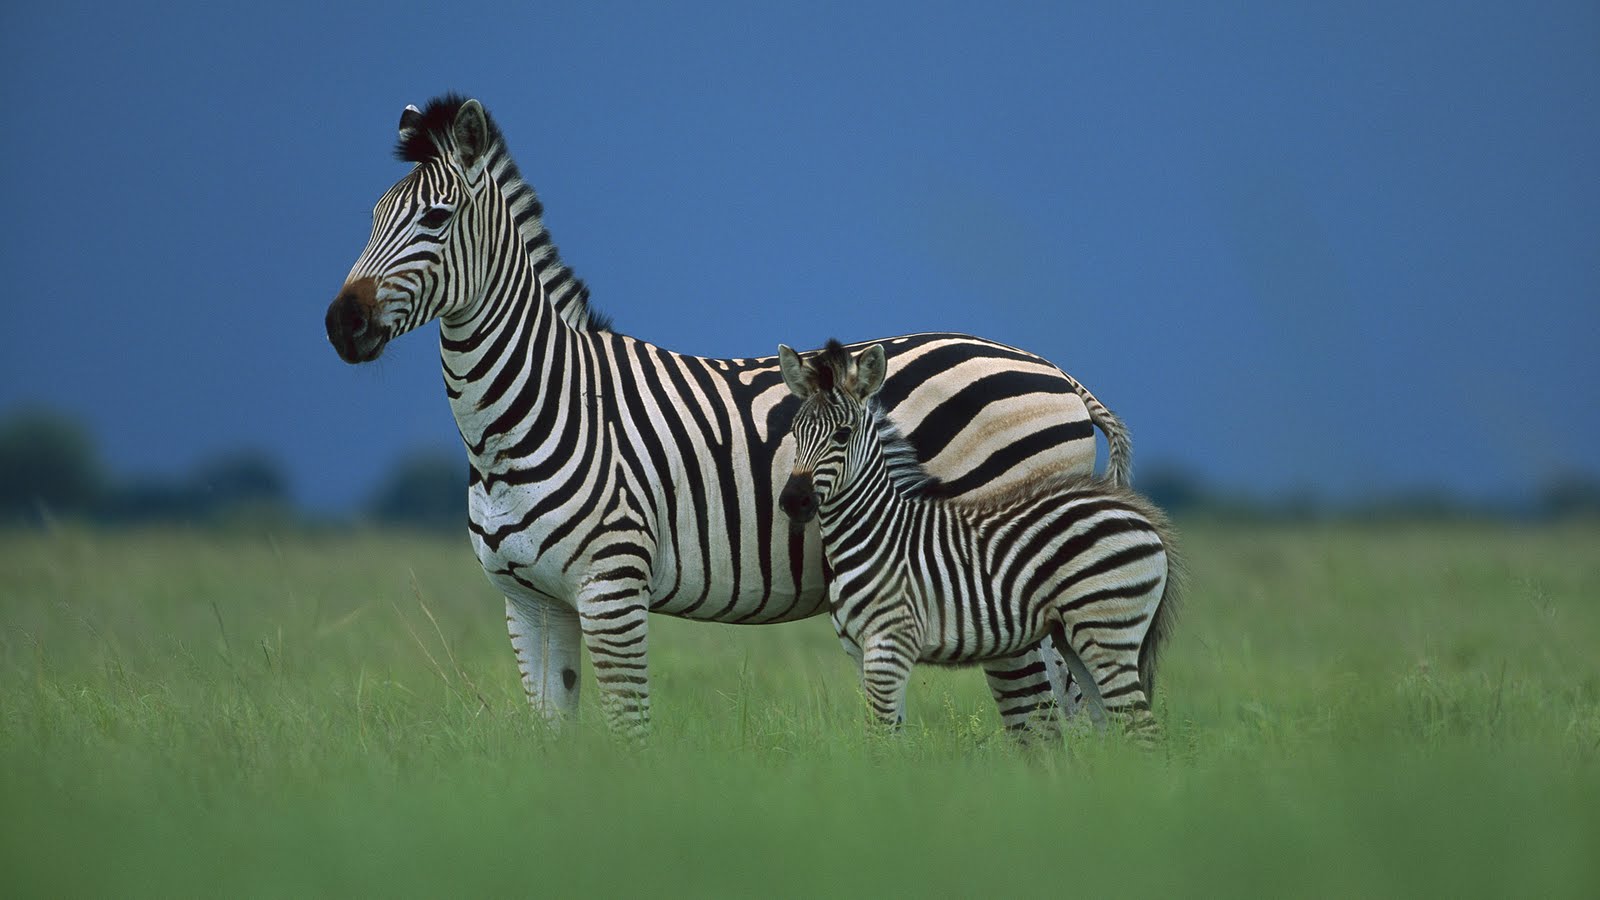 To Click On Zebra Amazing Animal 3d Wallpaper Then Choose